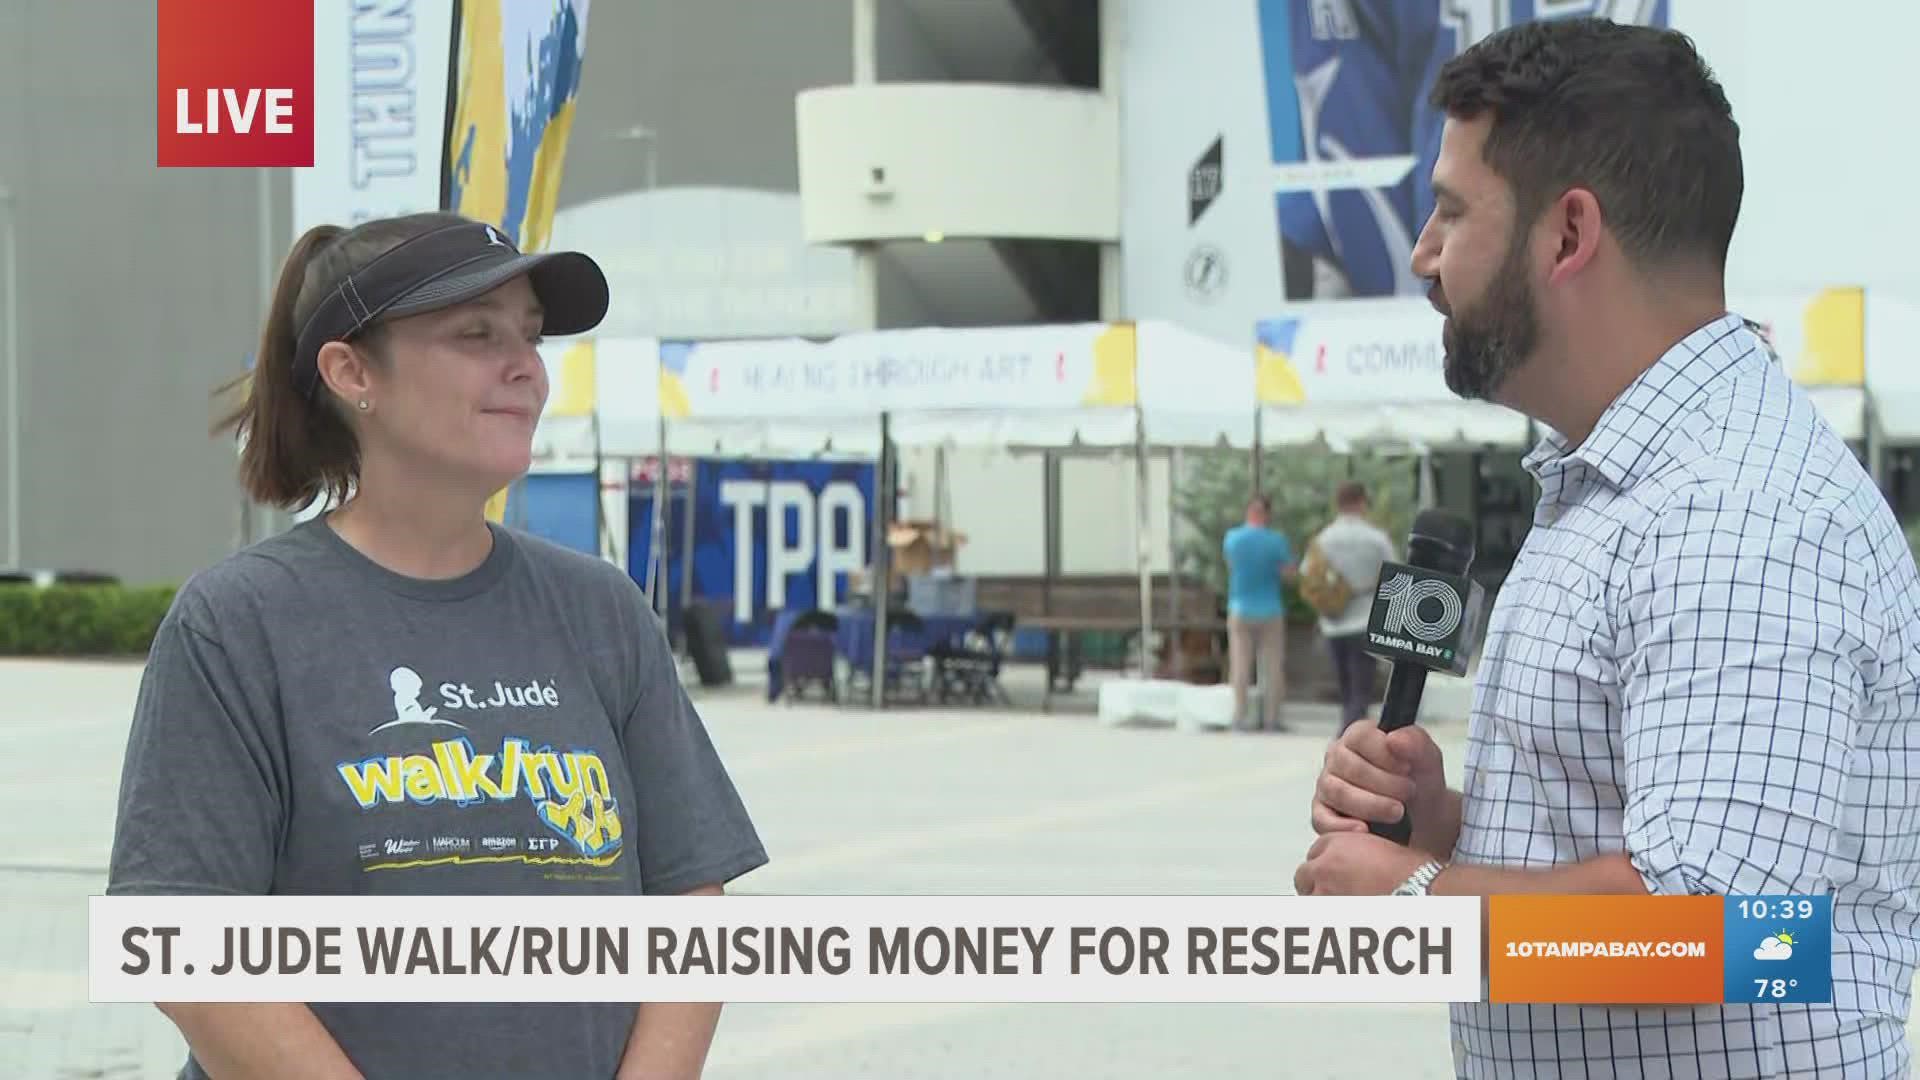 It was the first in-person St. Jude Walk/Run since 2019, raising money for childhood cancer research.